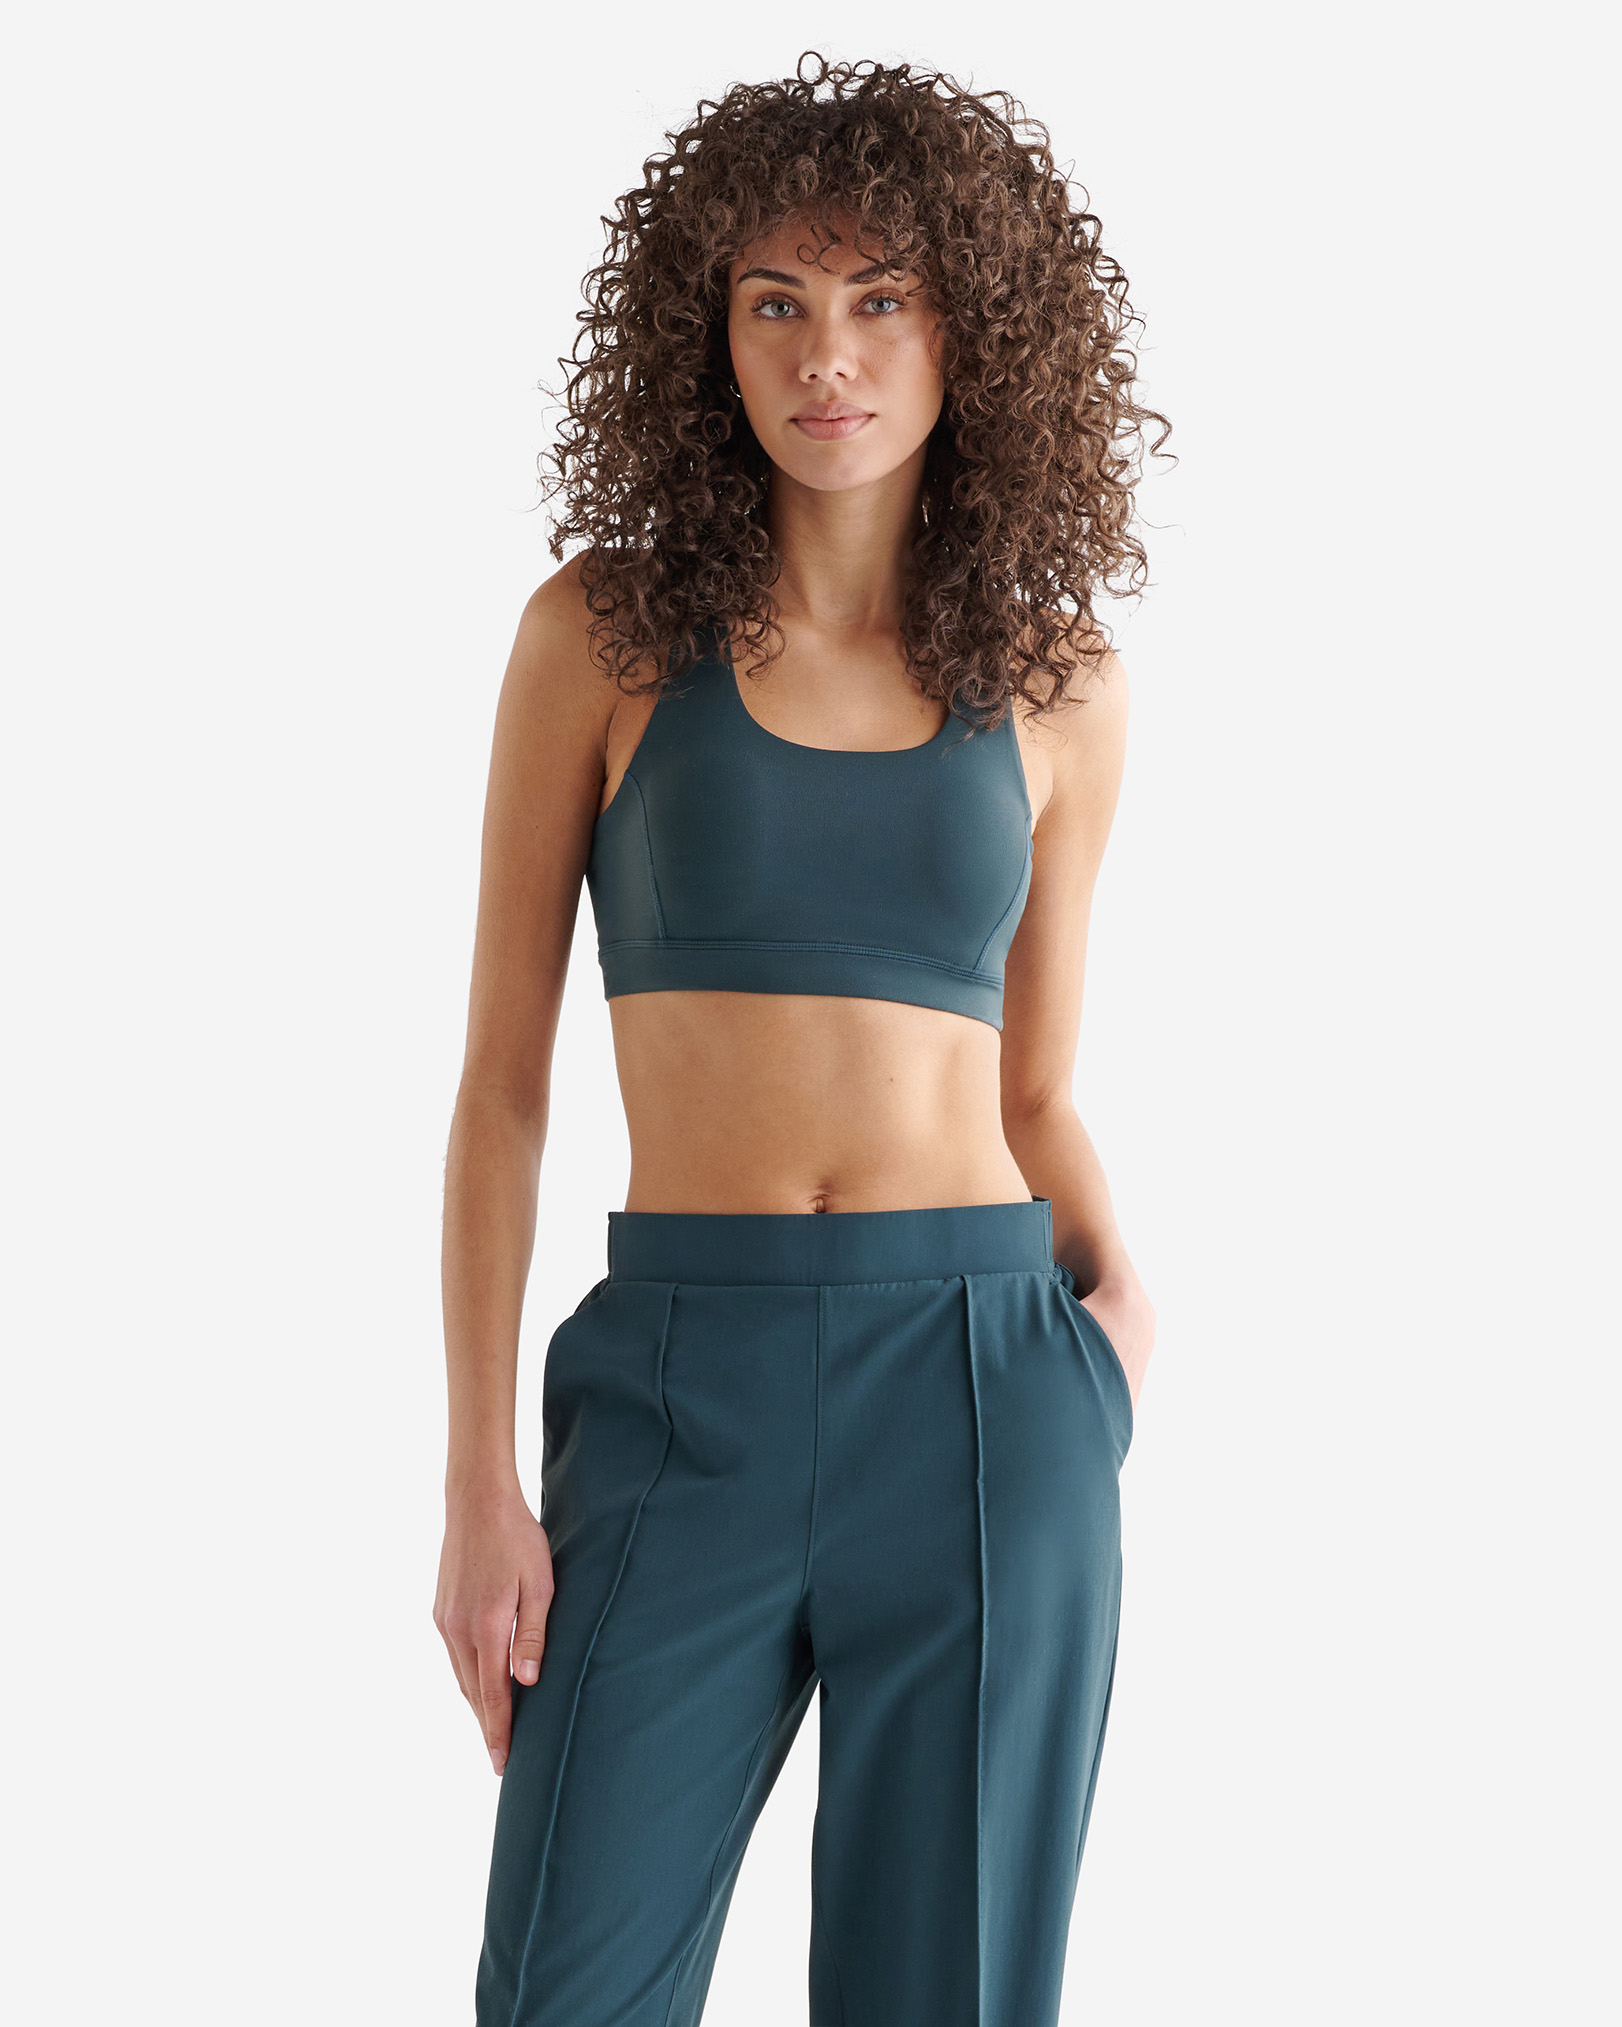 Roots Restore Sports Bra Shirt in Forest Teal